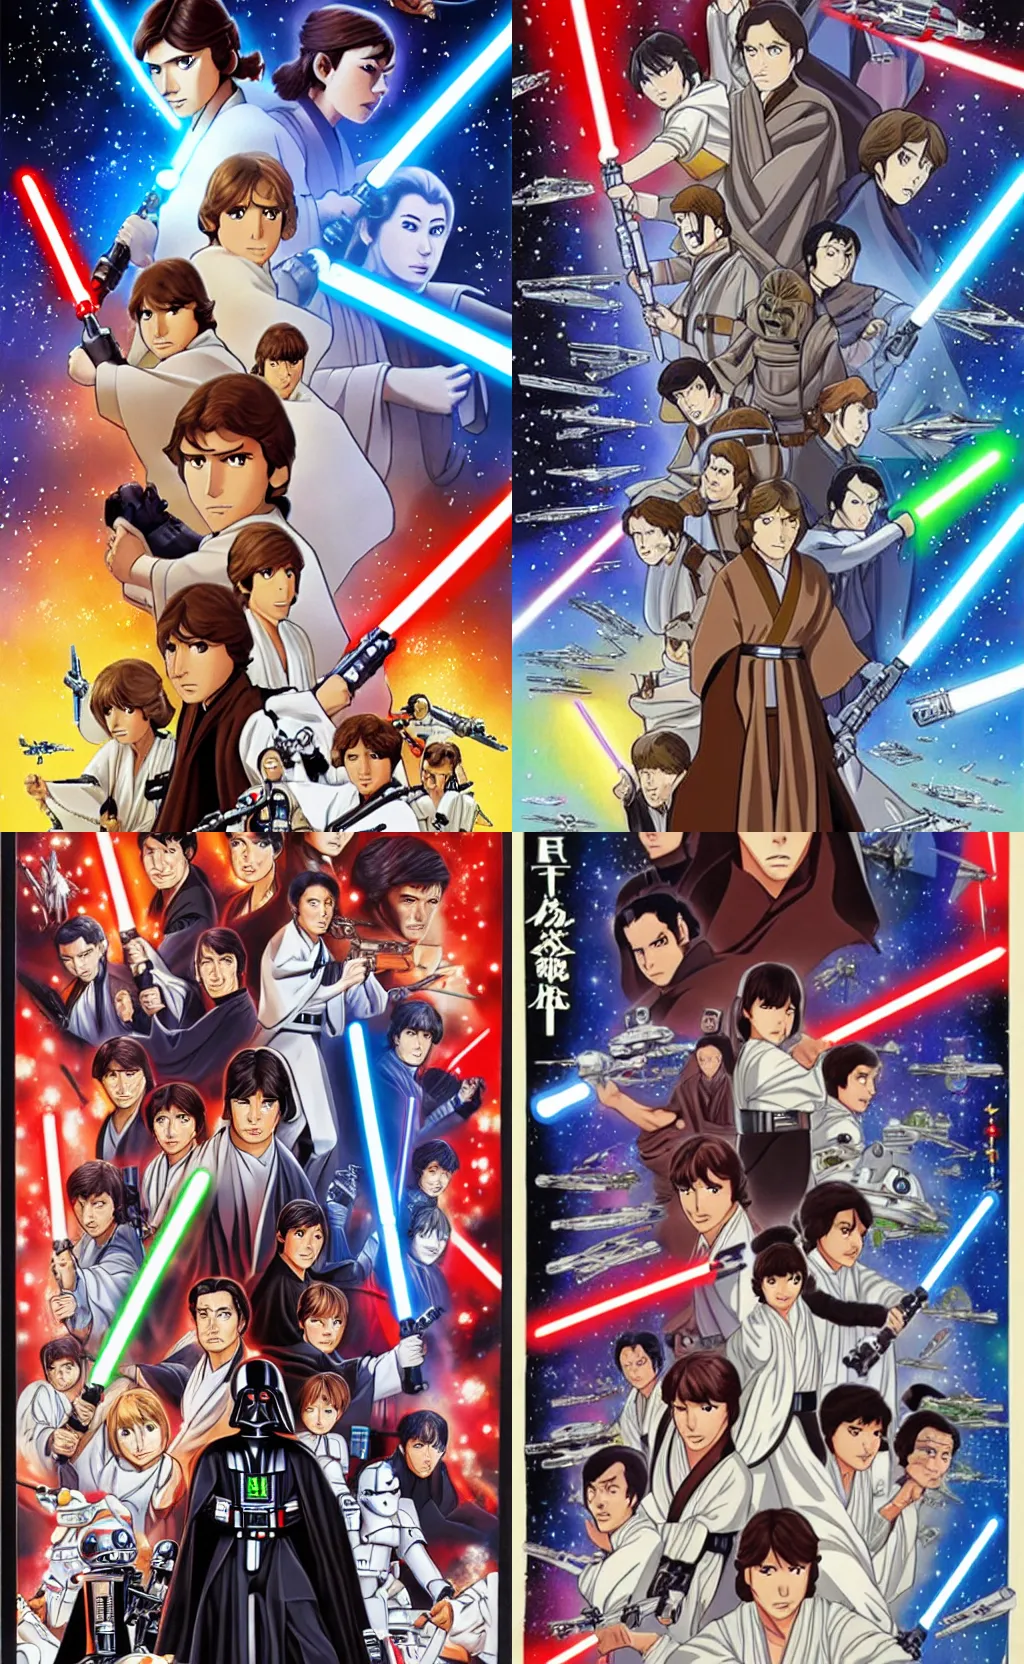 Prompt: A Star Wars Japanese Anime Poster of Episode 3